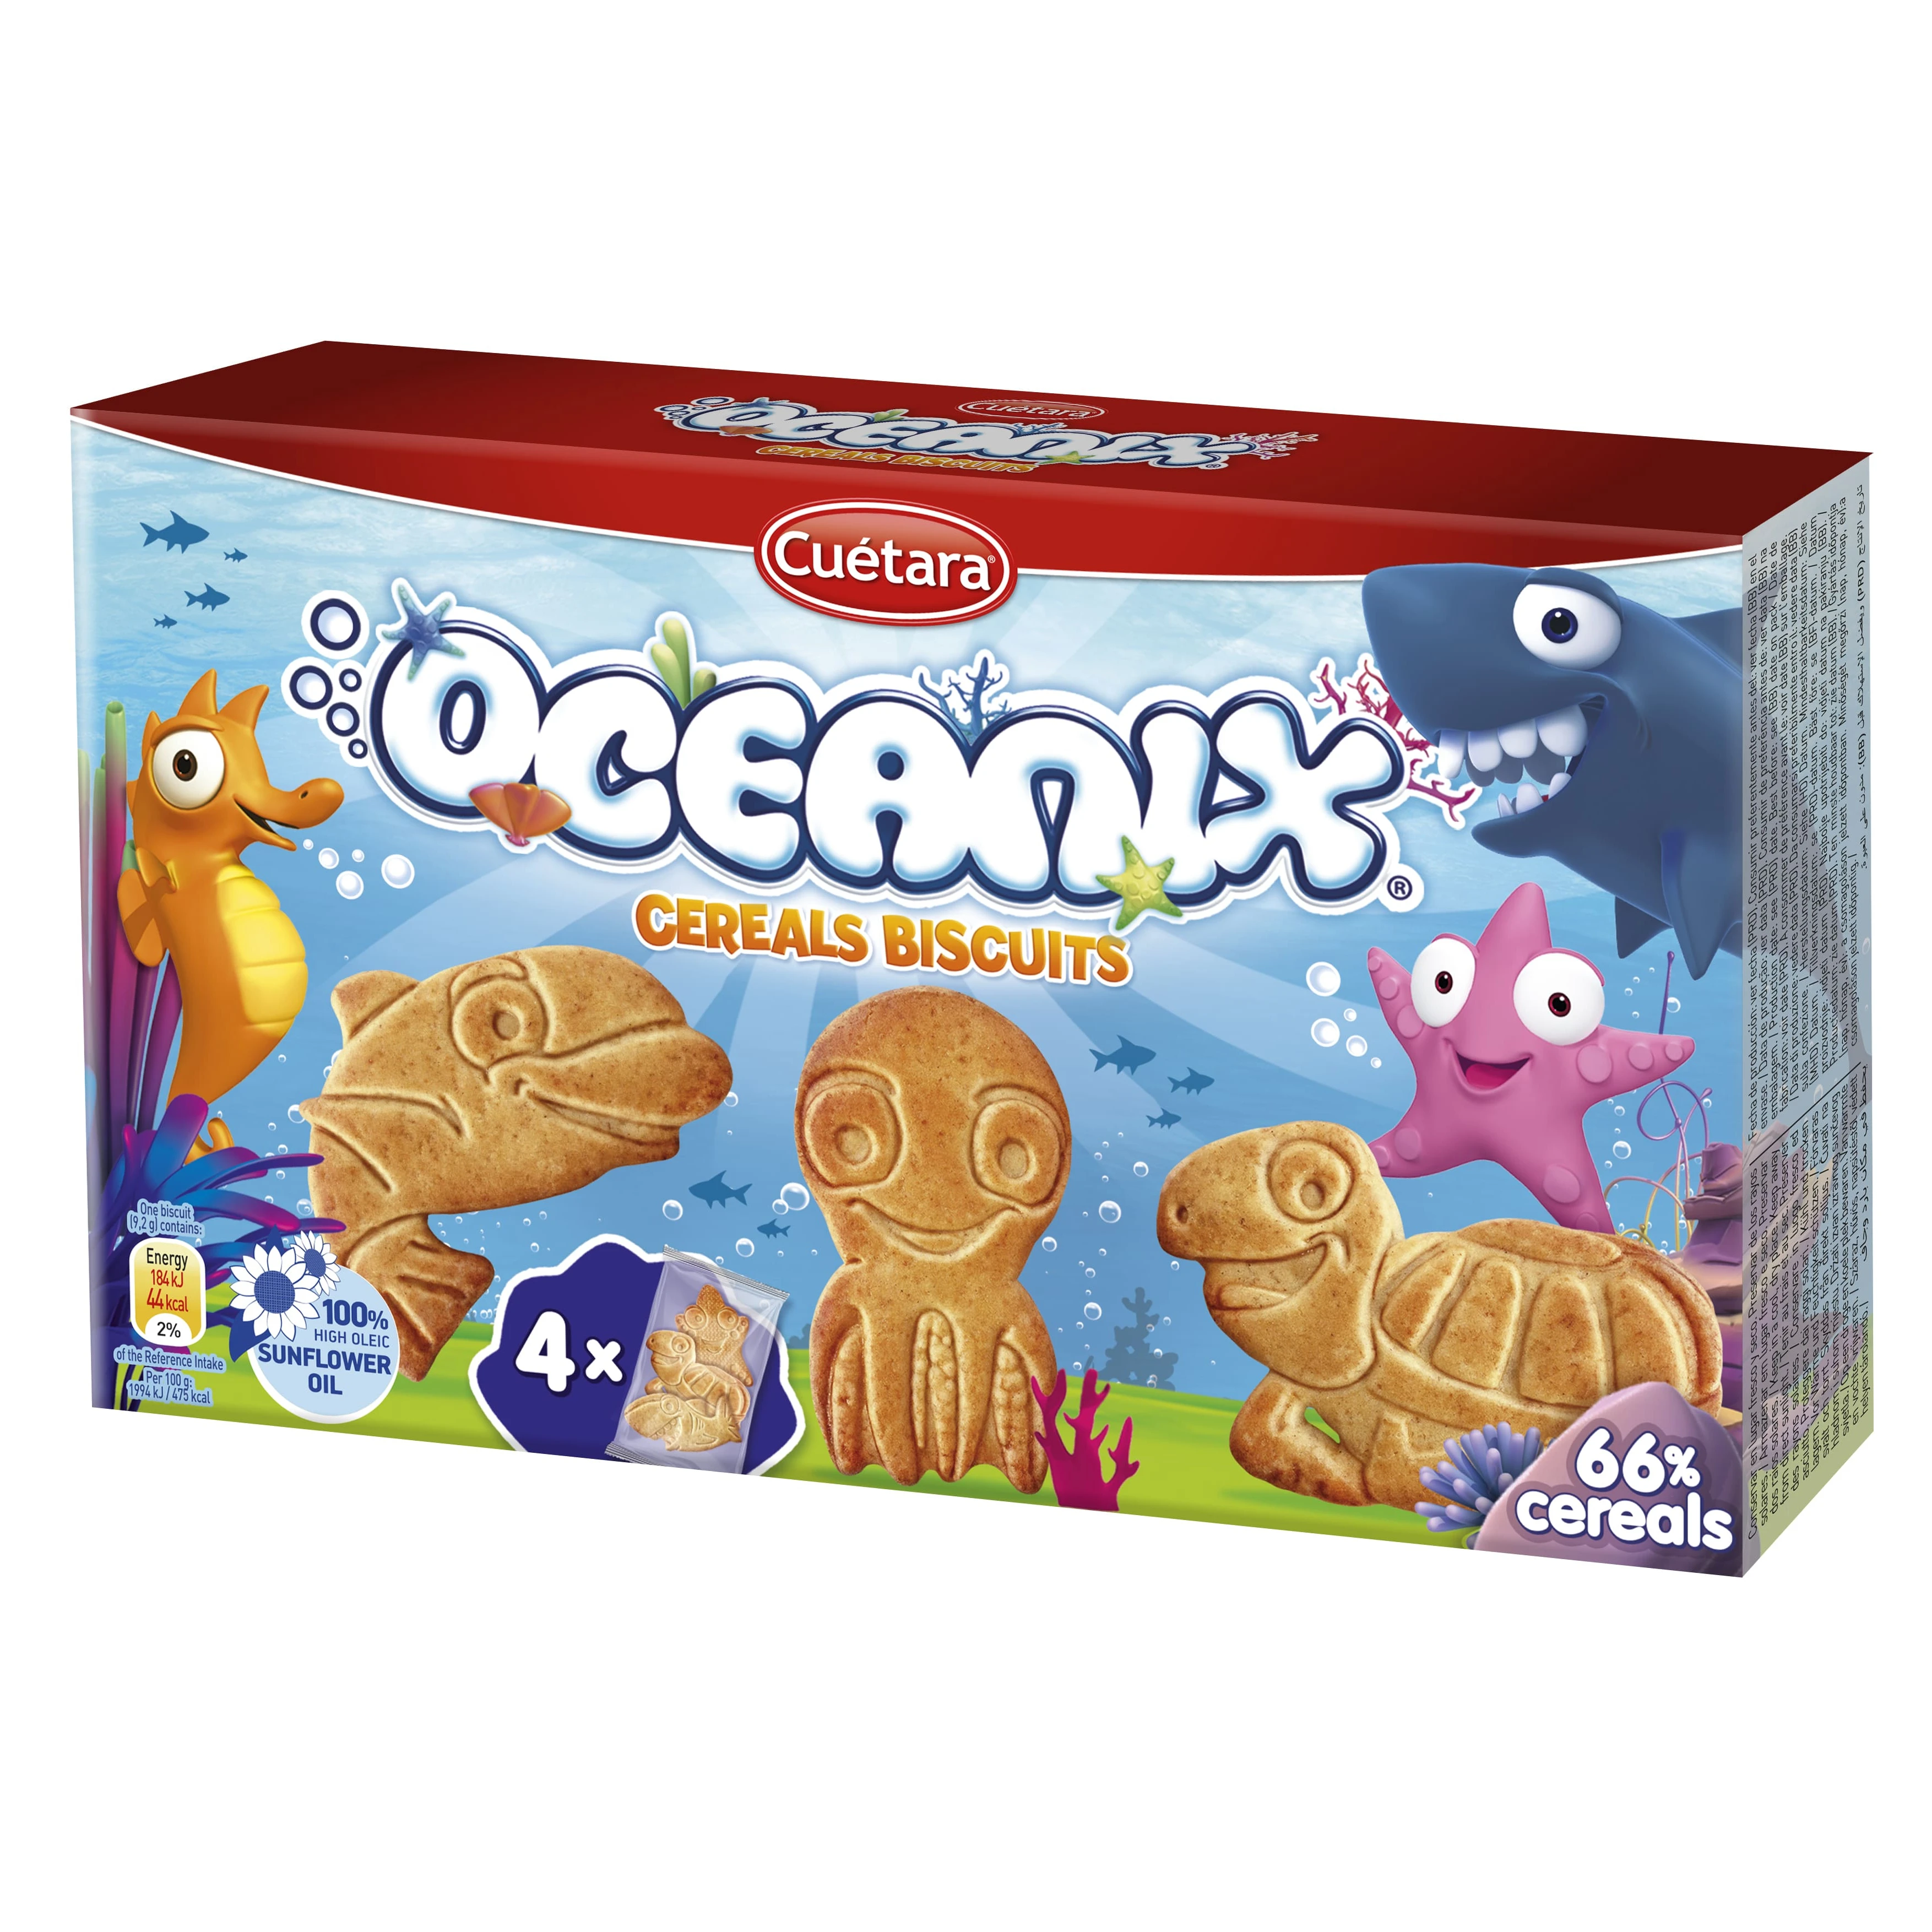 Oceanix Biscuits,Shaped Like Marine Animals,110 G. Cuetara,A Leading Spanish  Manufacturer Of Biscuits With More Than 80 Years - Buy Kids Cookies Kid  Biscuits Kid Cereals Kids Healthy Cereals Diet Cereals Sugar Free